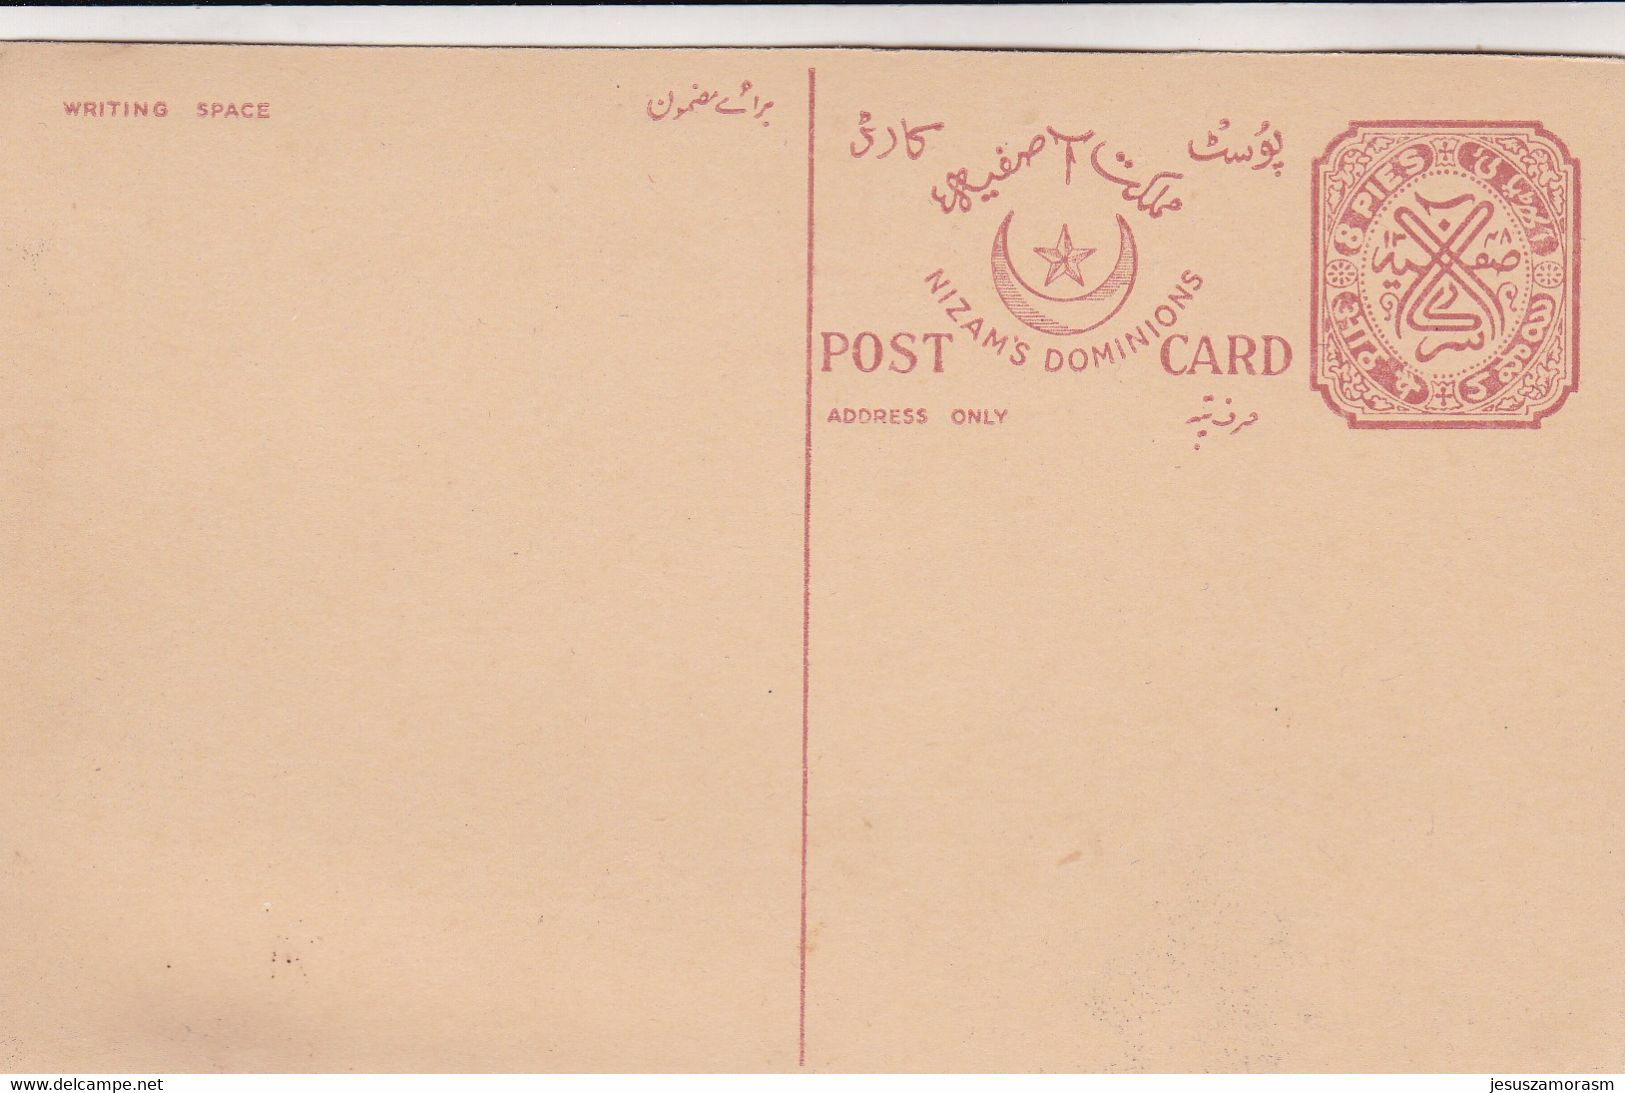 India - Inland Letter Cards